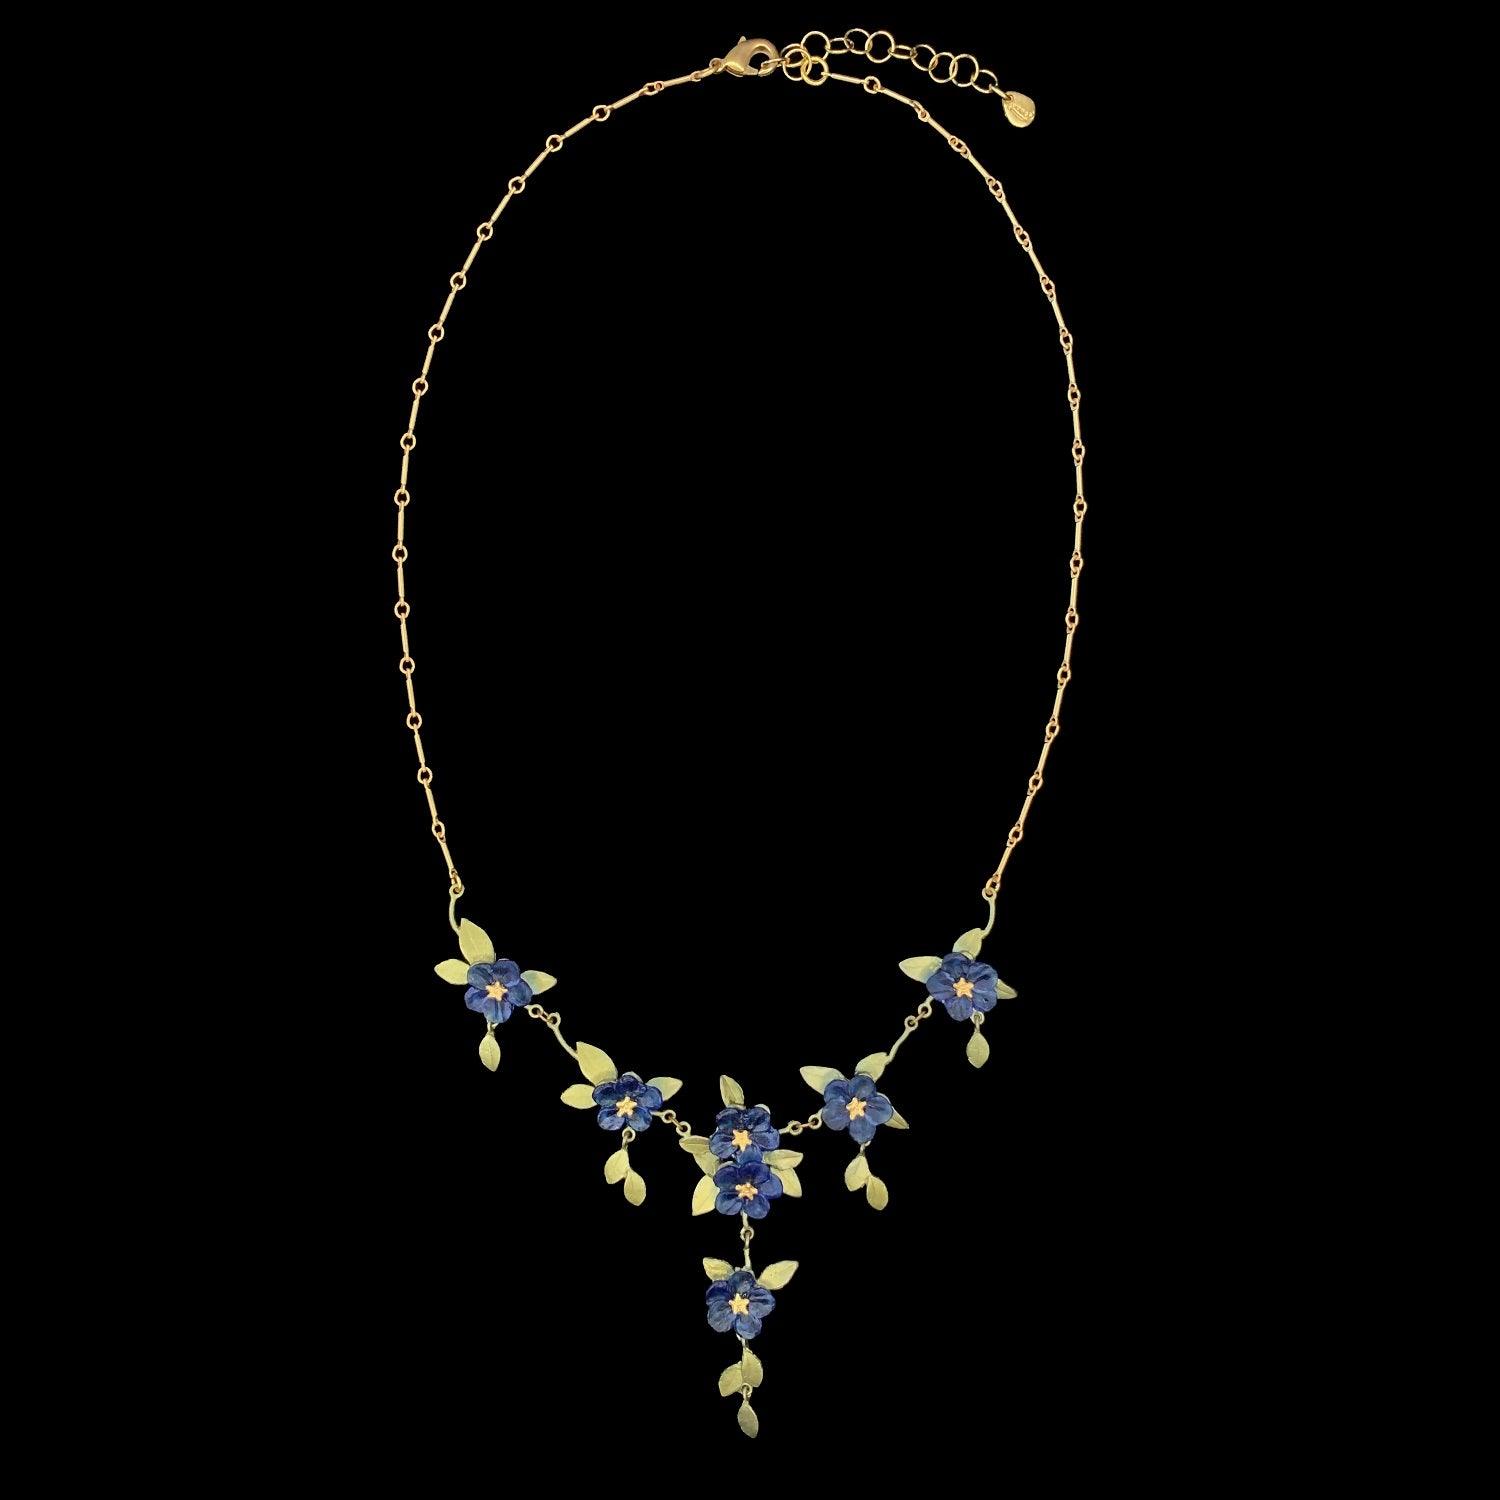 Blue-Eyed Mary Necklace - Michael Michaud Jewellery